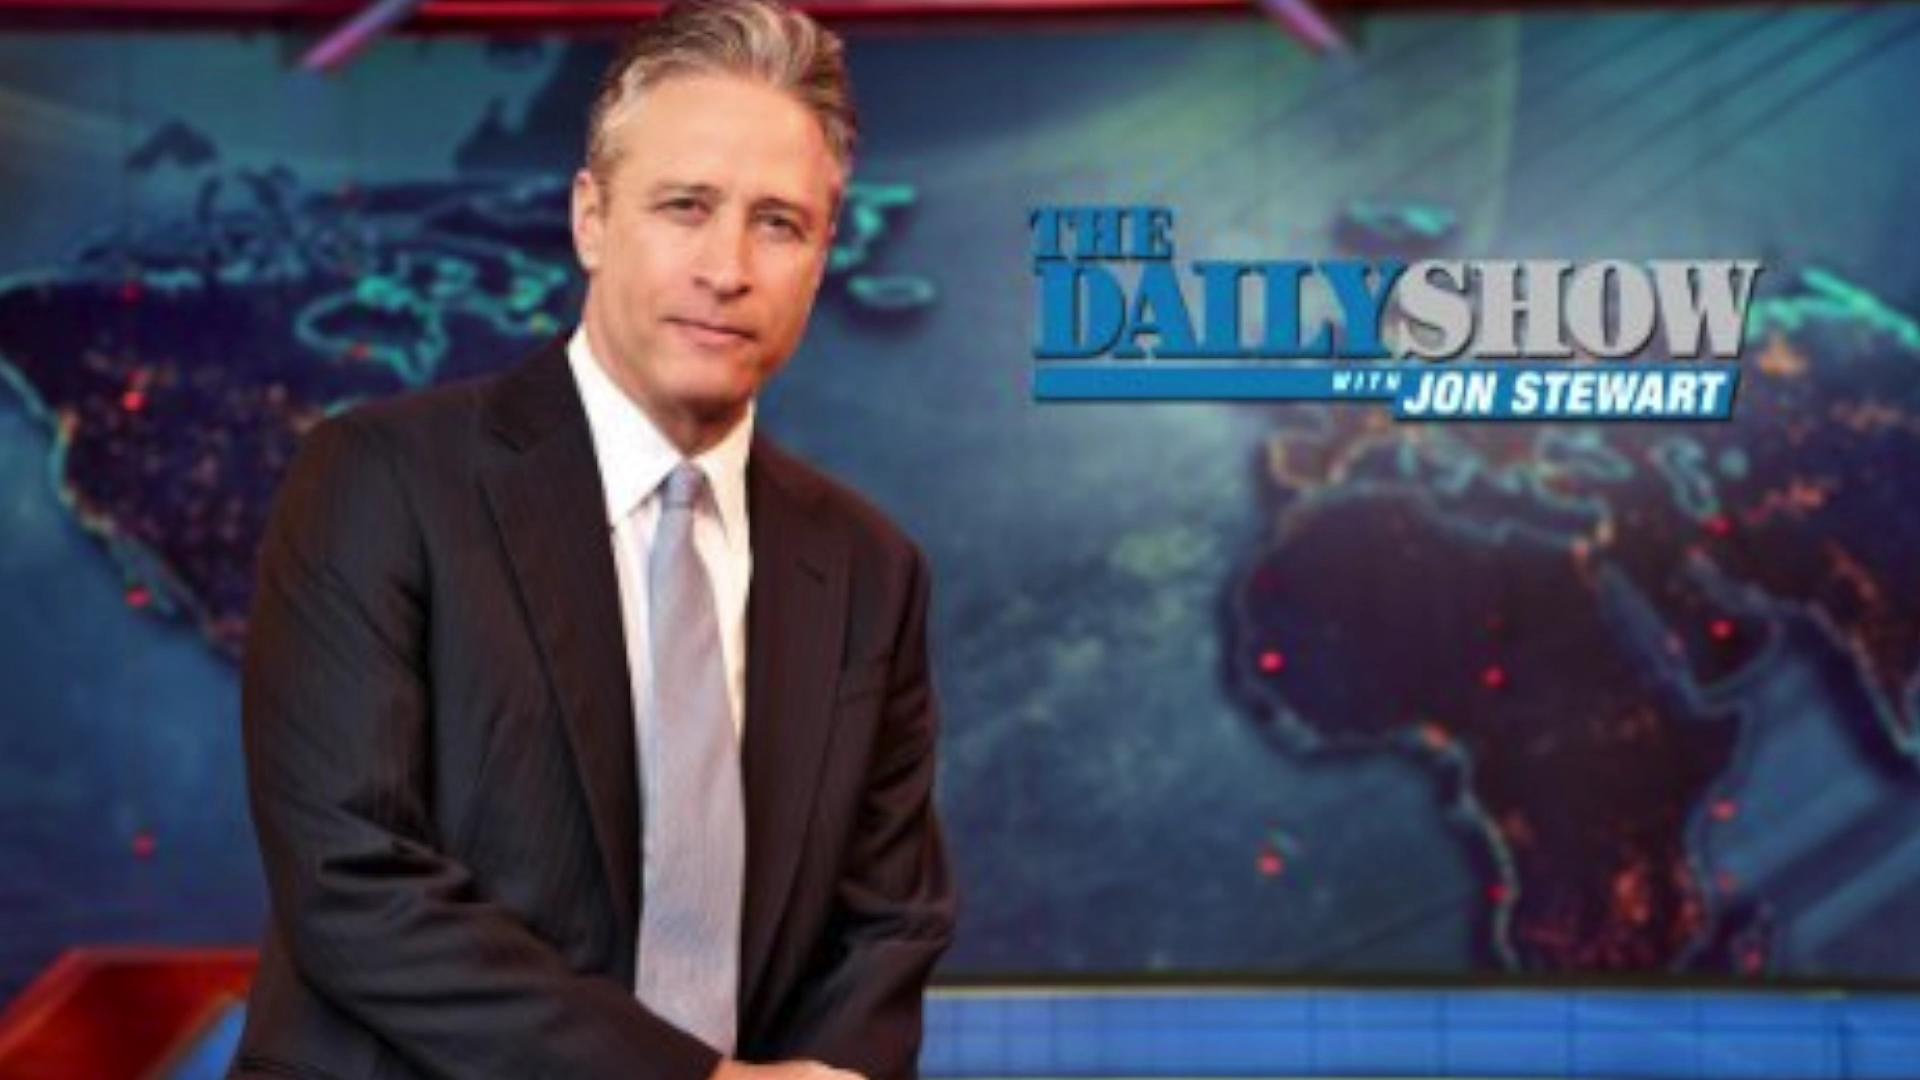 The Daily Show With Jon Stewart #5